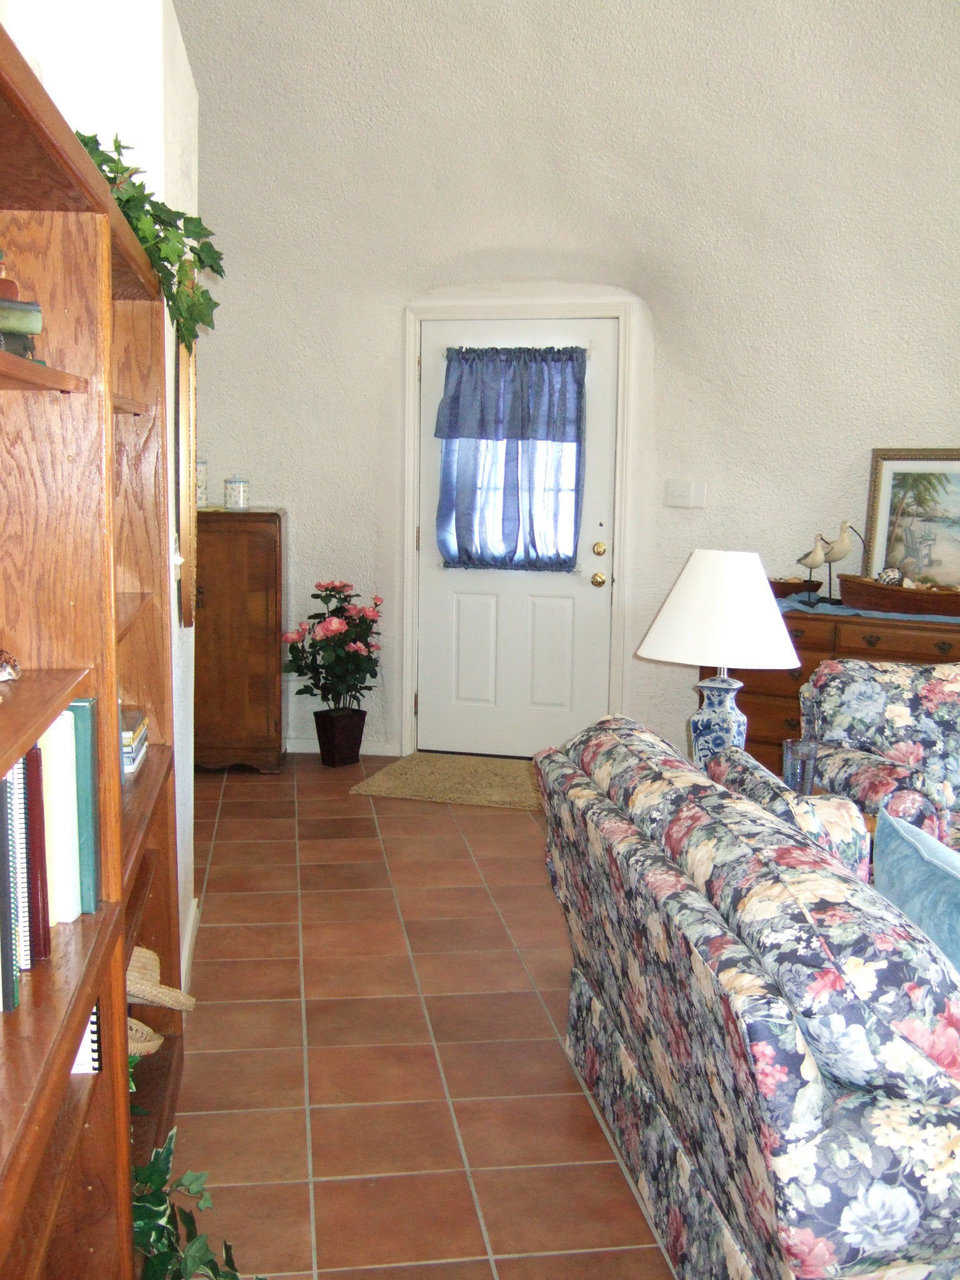 An inviting entry  — A curtained front doorway welcomes visitors.